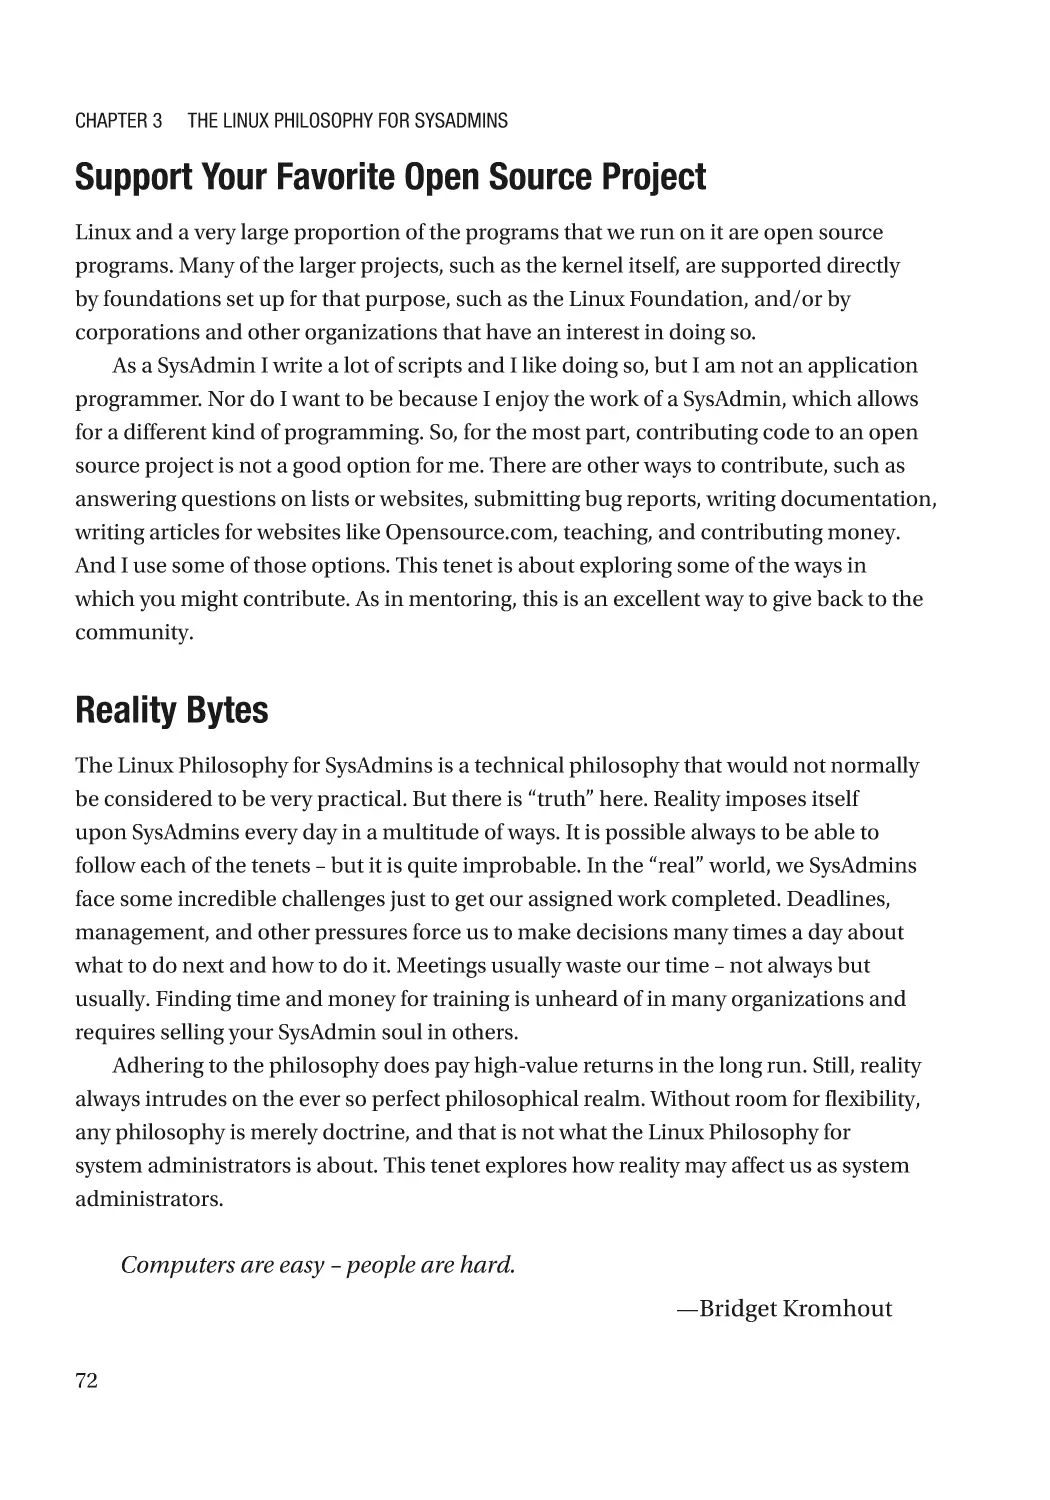 Support Your Favorite Open Source Project
Reality Bytes